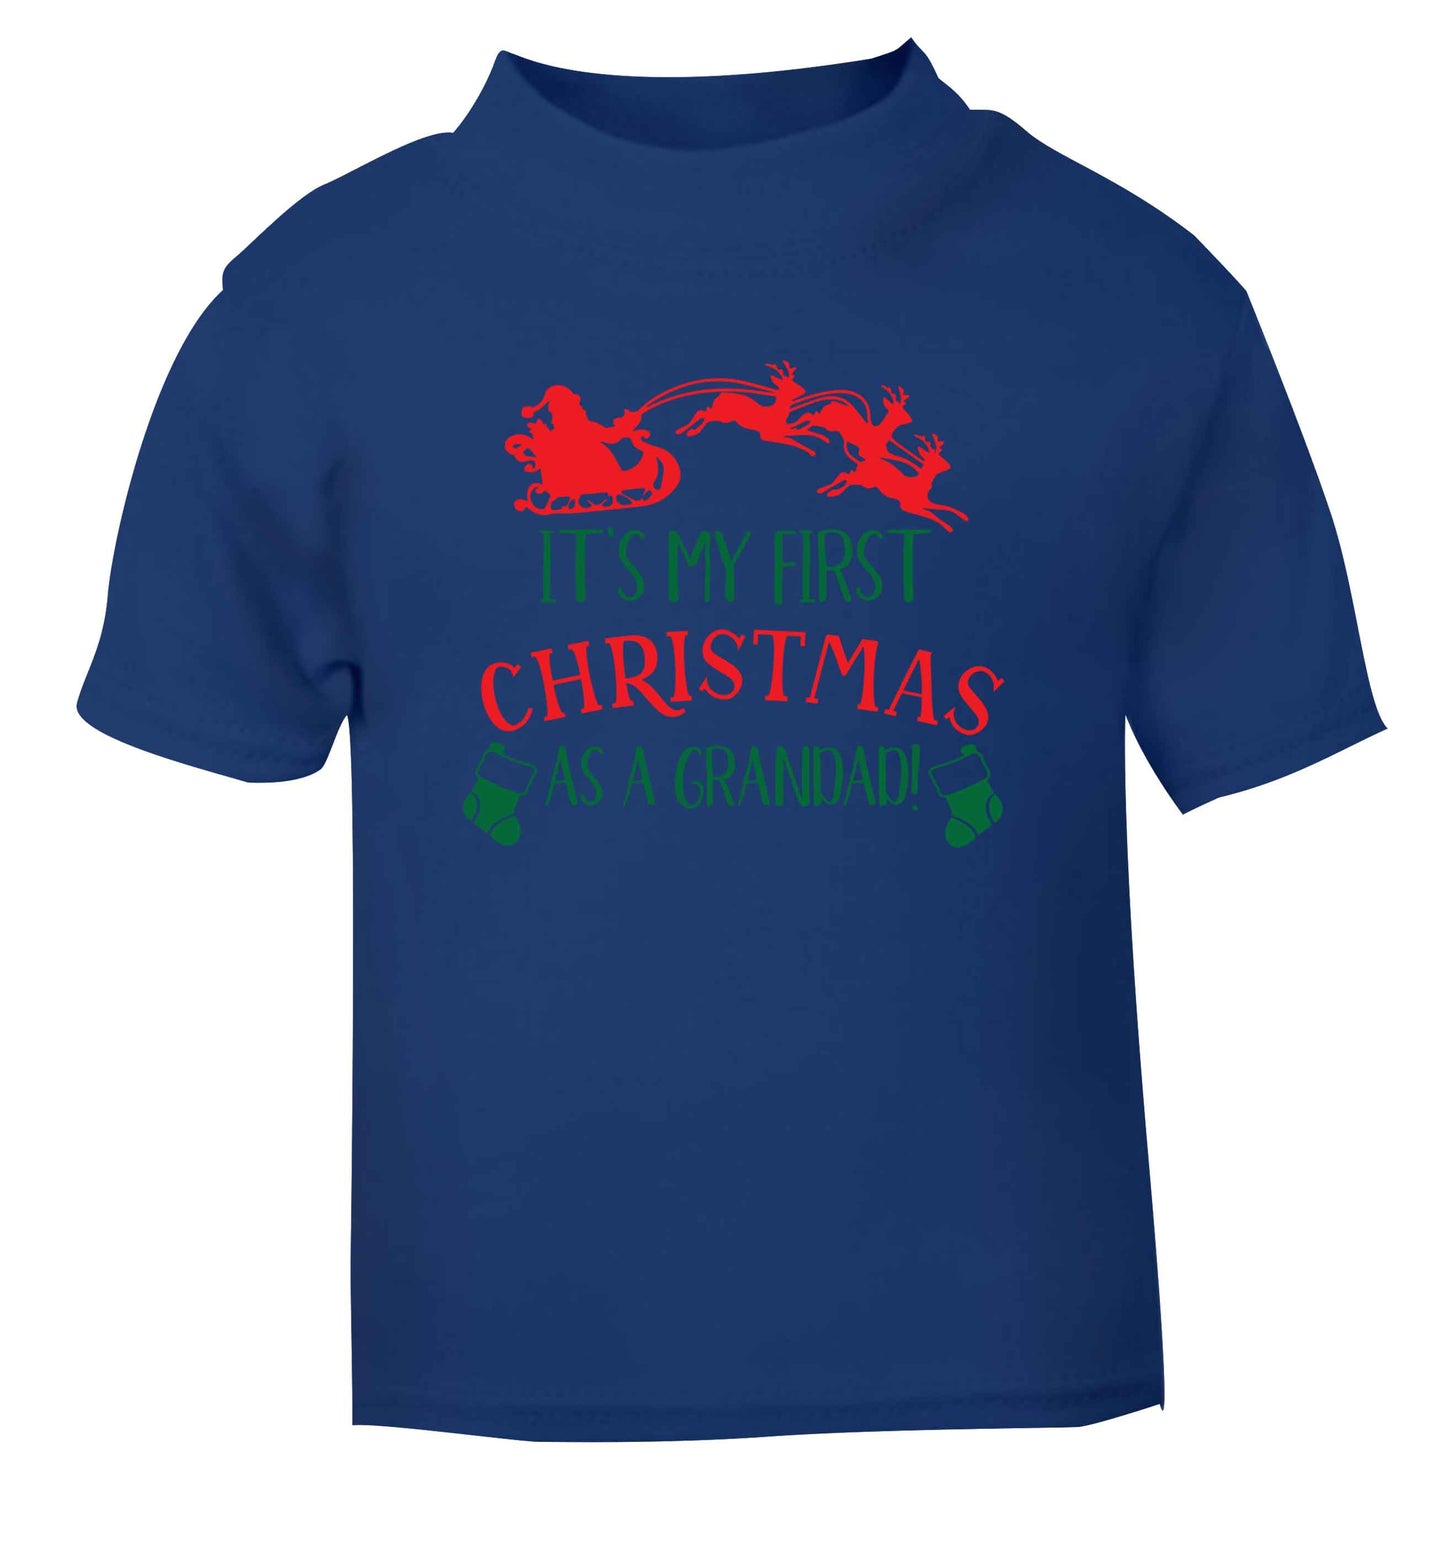 It's my first Christmas as a grandad! blue Baby Toddler Tshirt 2 Years